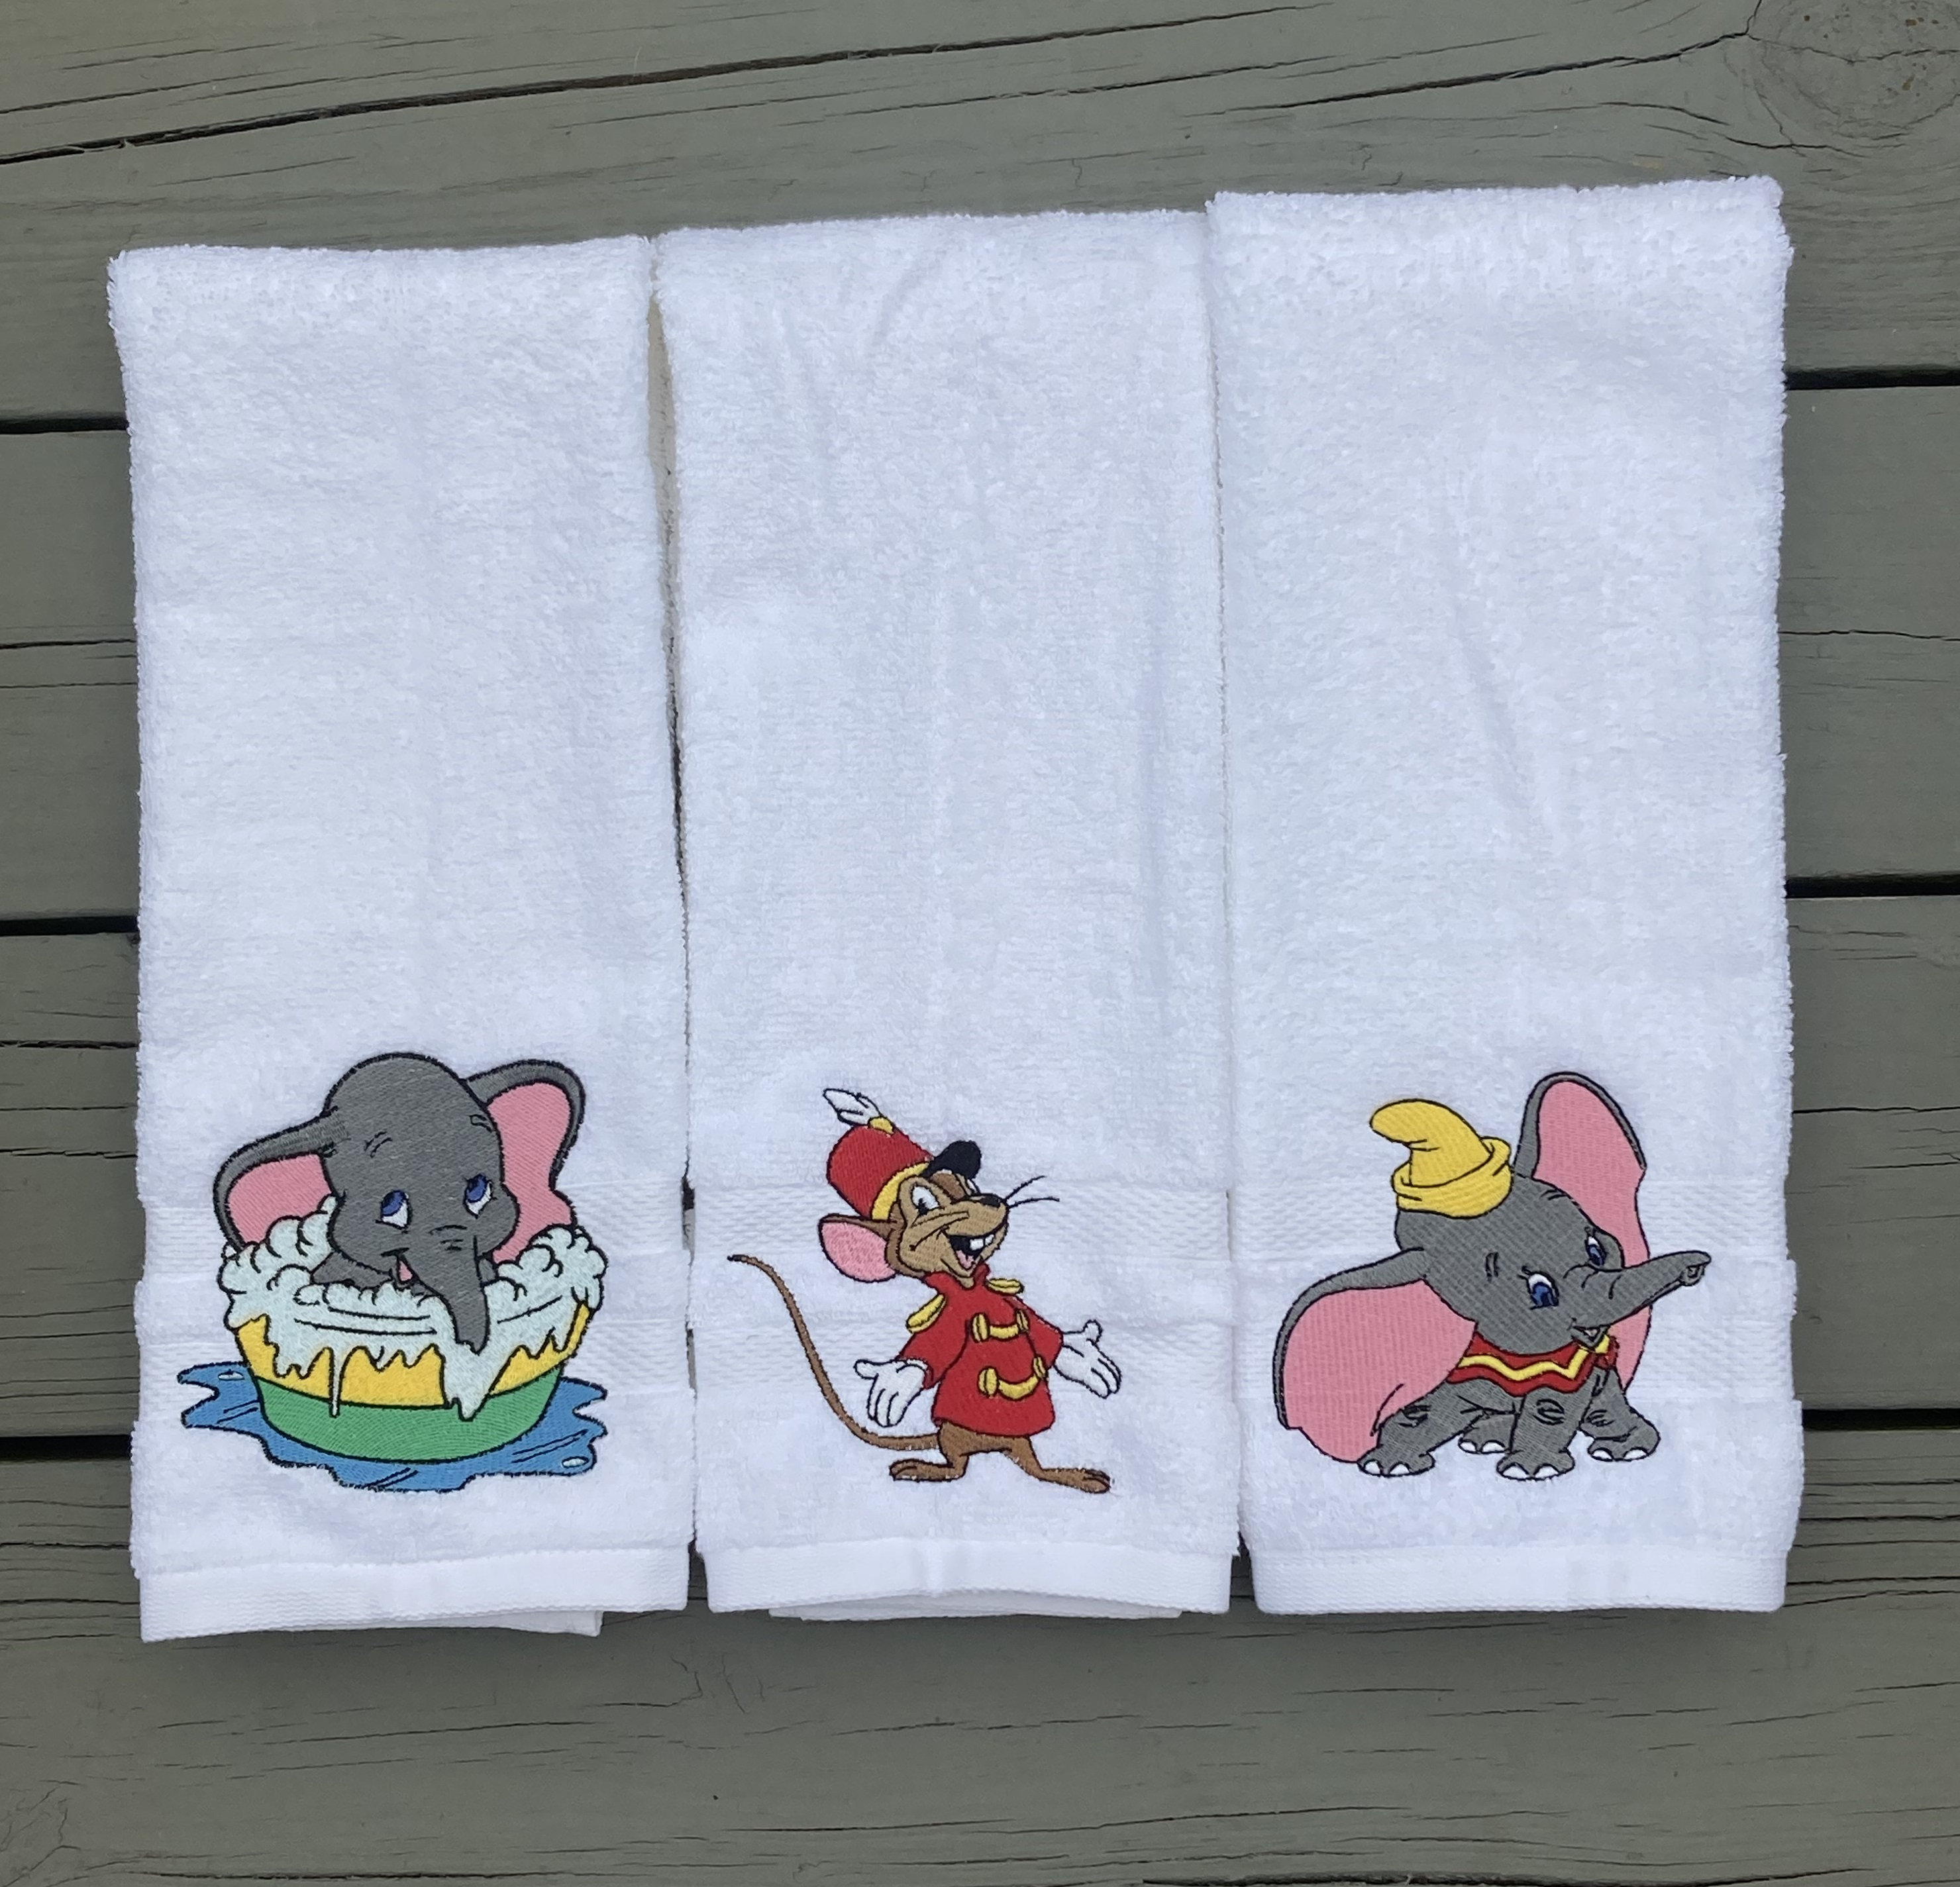 Dumbo Pillow Disney Movie Pillow All Our Pillows Are Handmade Hypoallergenic Cotton with Flannel Backing Ideal for Gift and Multiple Uses 